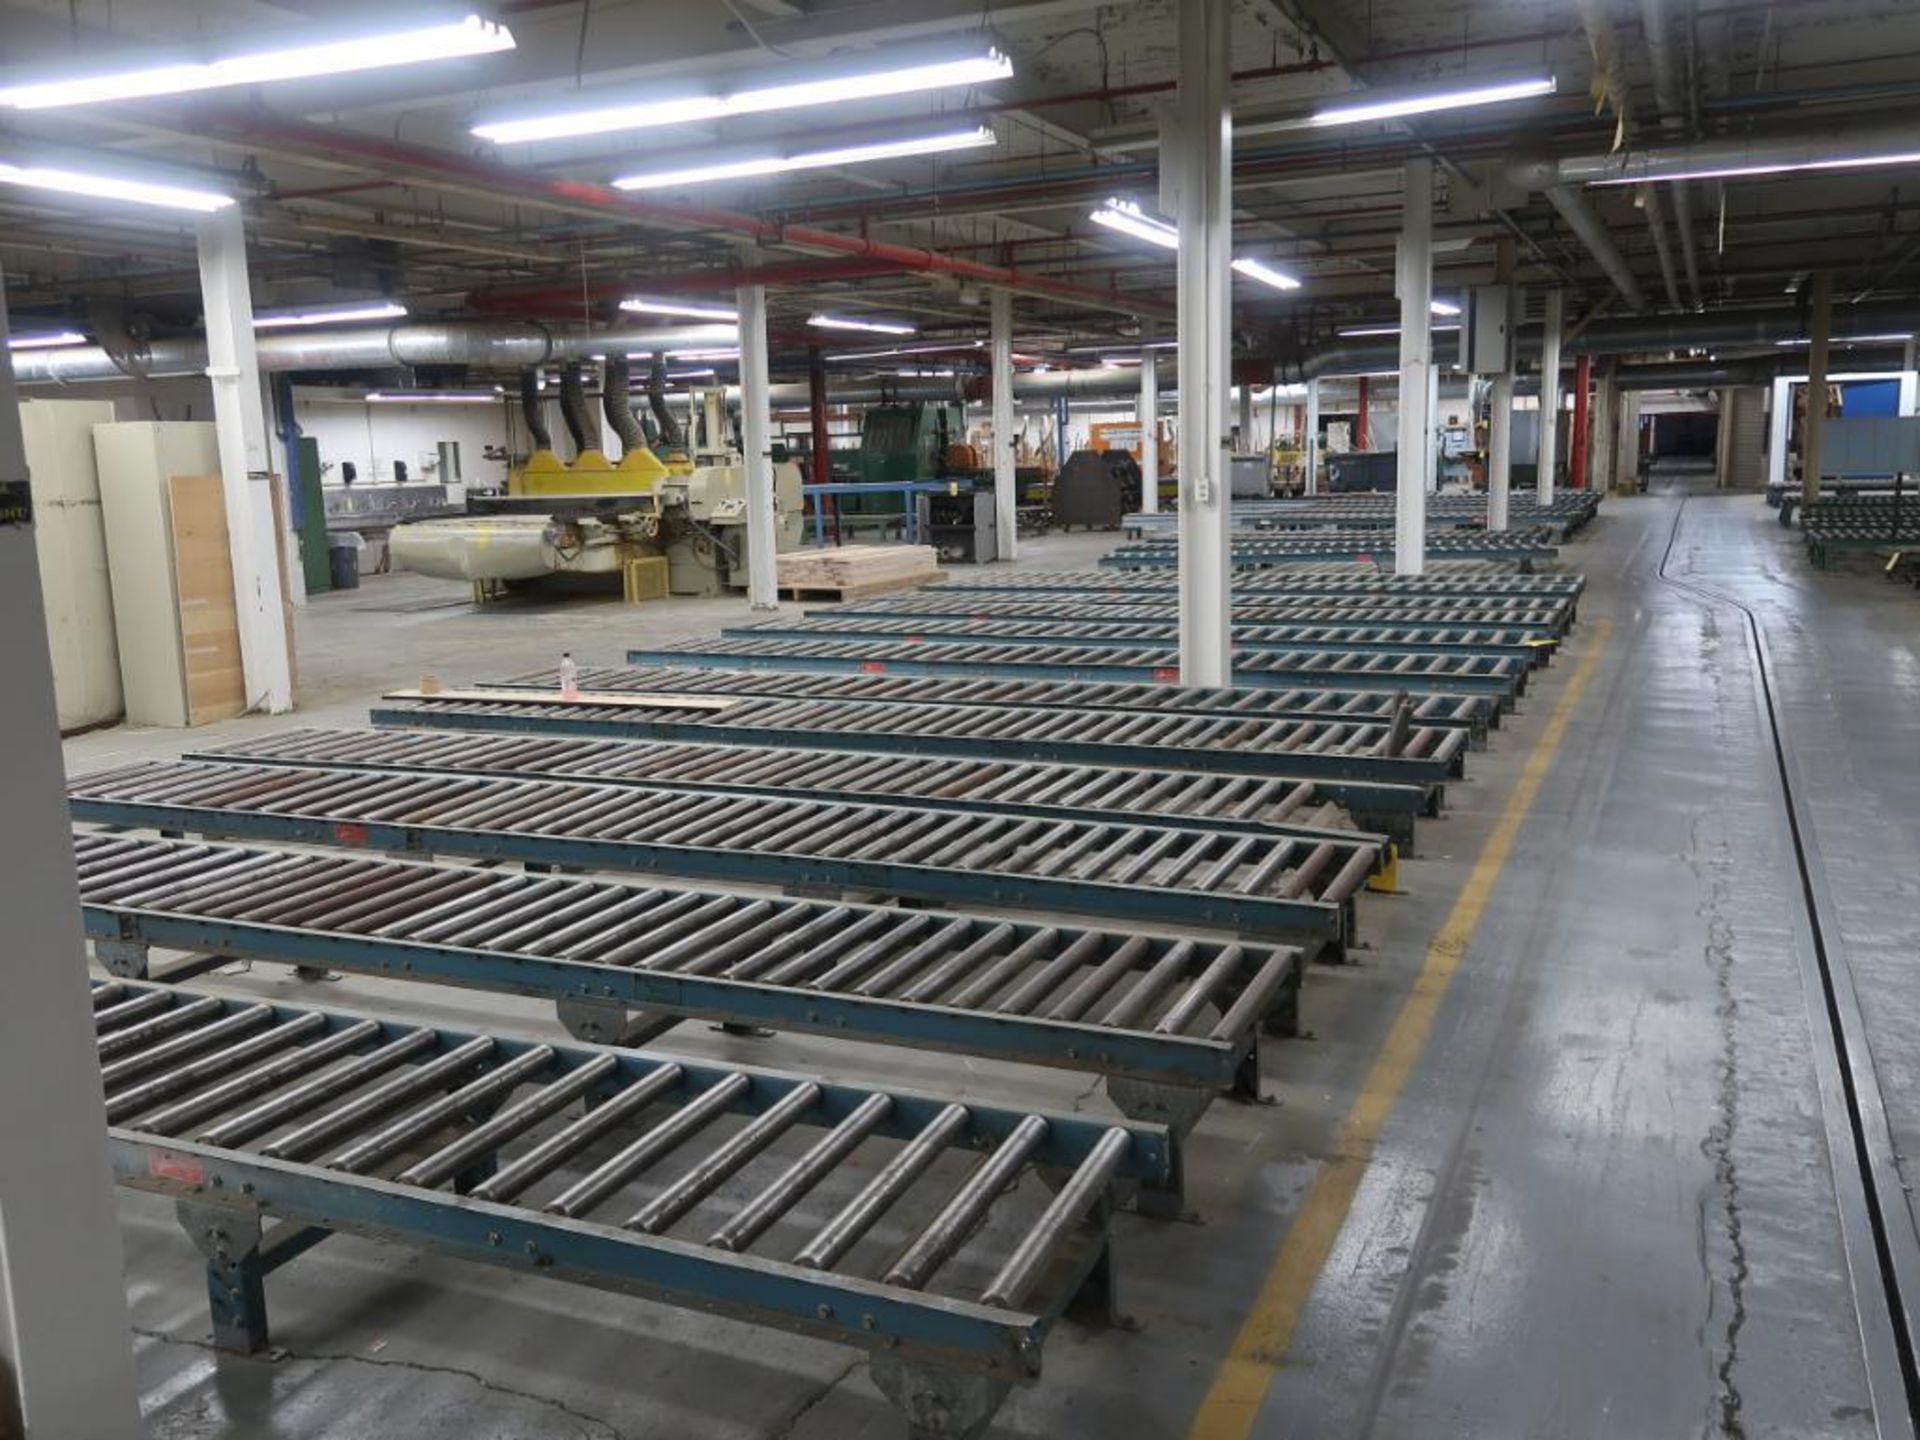 LOT: Approx. 400 ft. of Assorted Width Roller Conveyor in (27) Sections including (5) Transfer Dolli